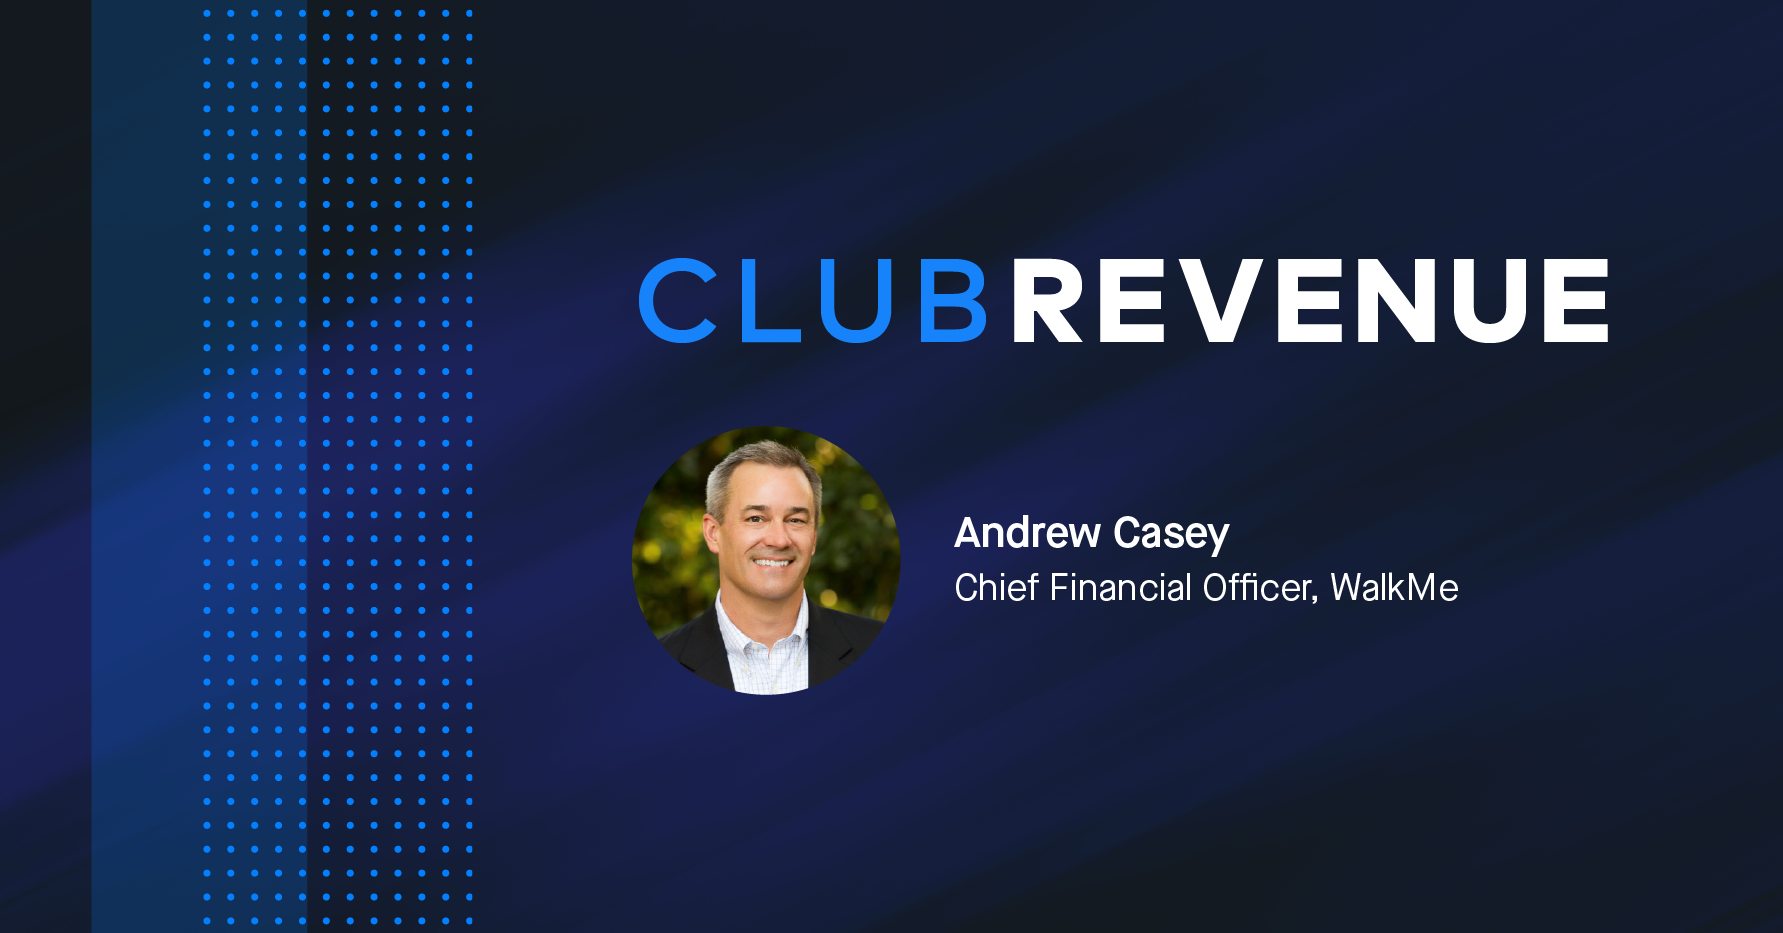 Banner image that says Club Revenue with a headshot photograph of Andrew Casey, Chief Financial Officer at WalkMe